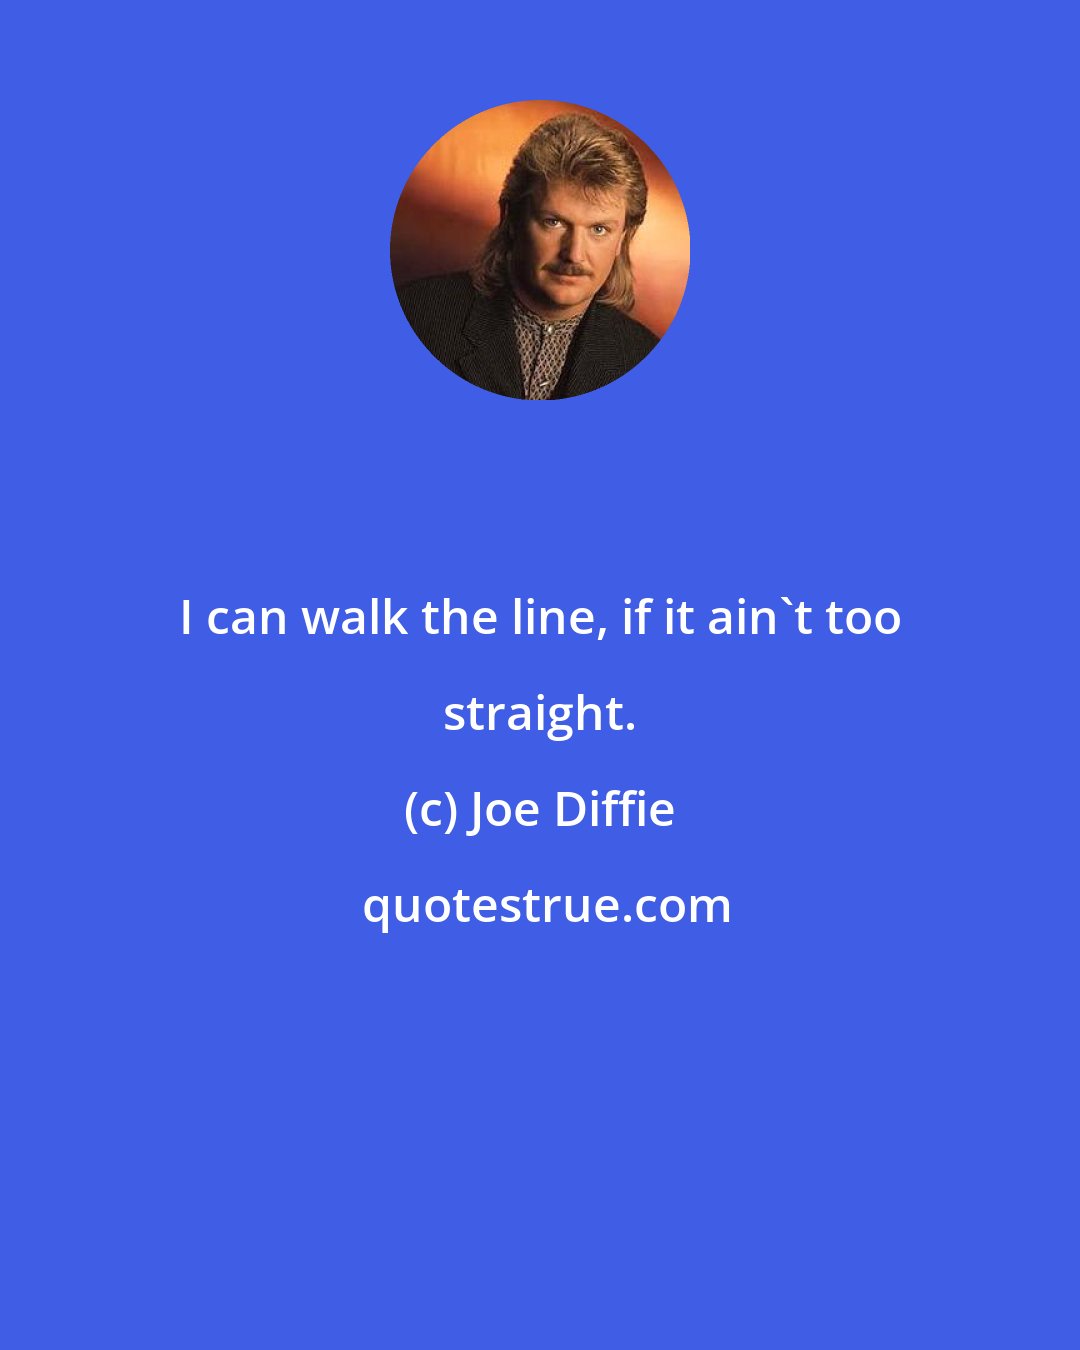 Joe Diffie: I can walk the line, if it ain't too straight.